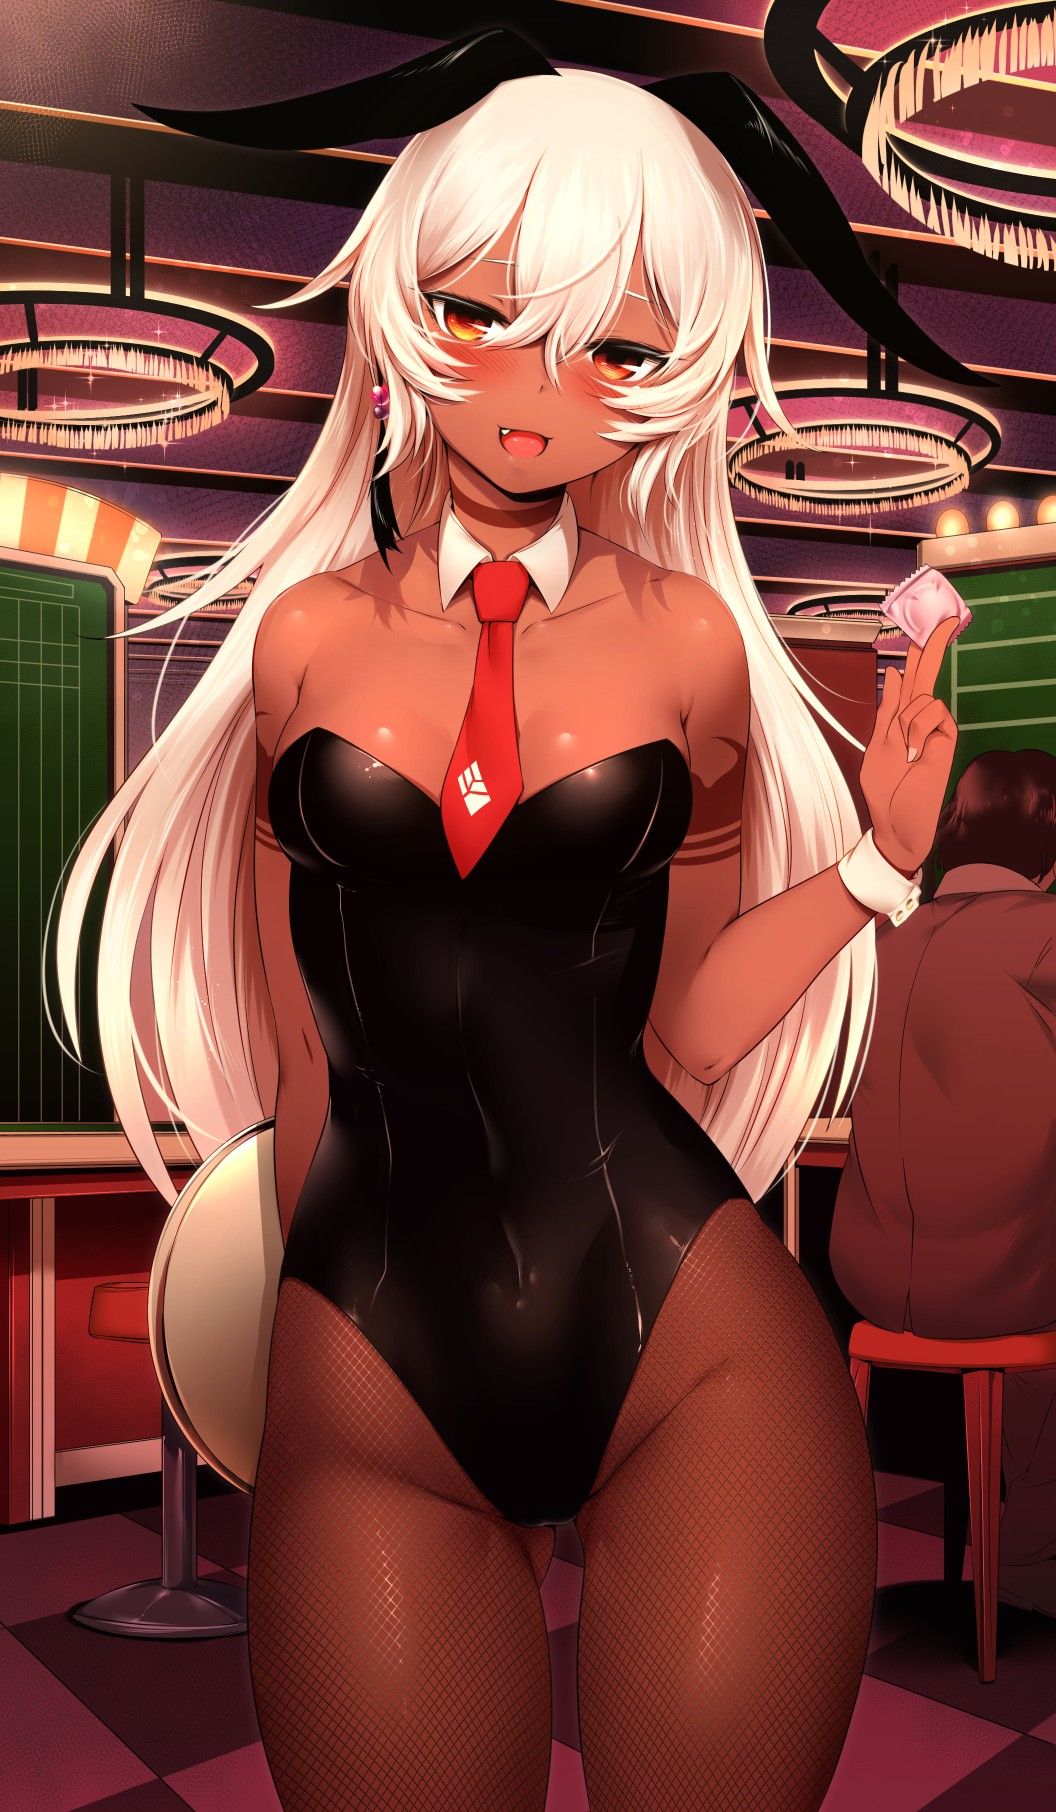 Bunny's lewdness is abnormal That clothes what 19